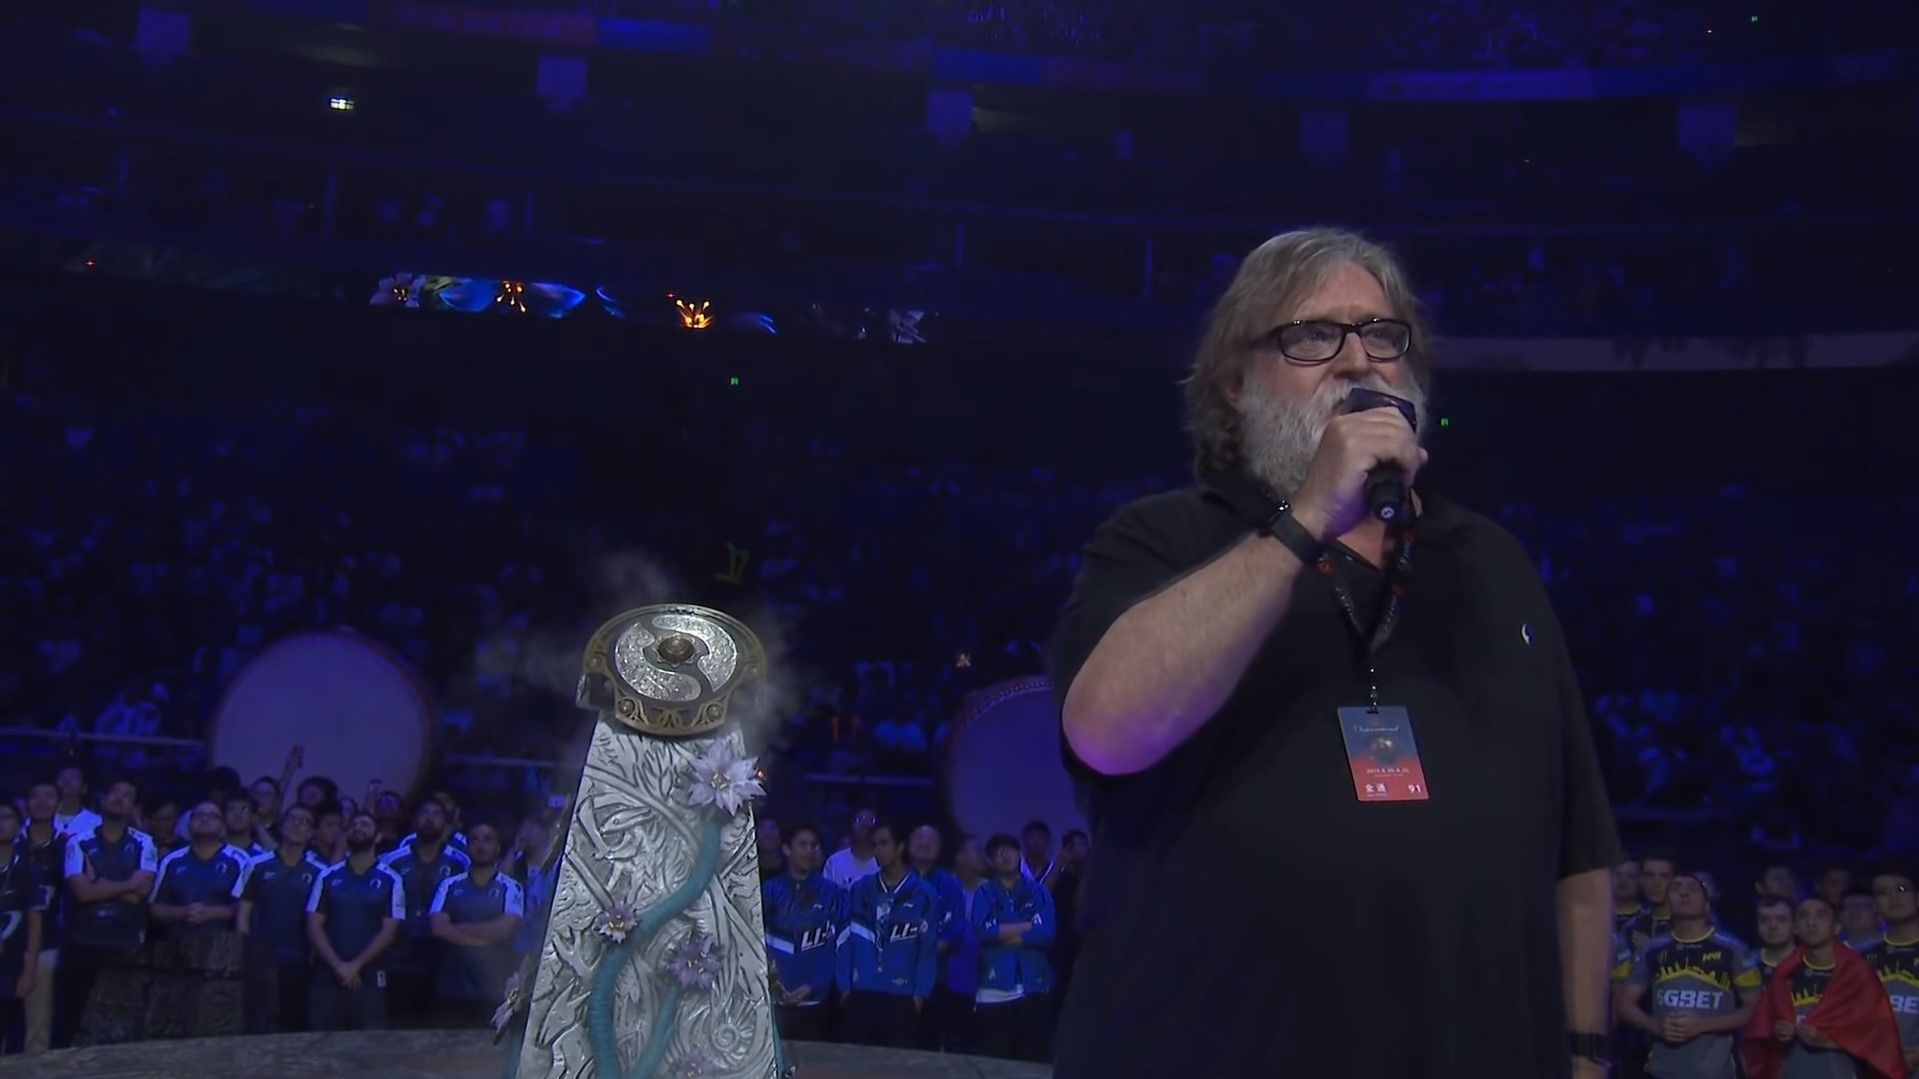 Gabe Newell may be meeting with New Zealand leadership to discuss